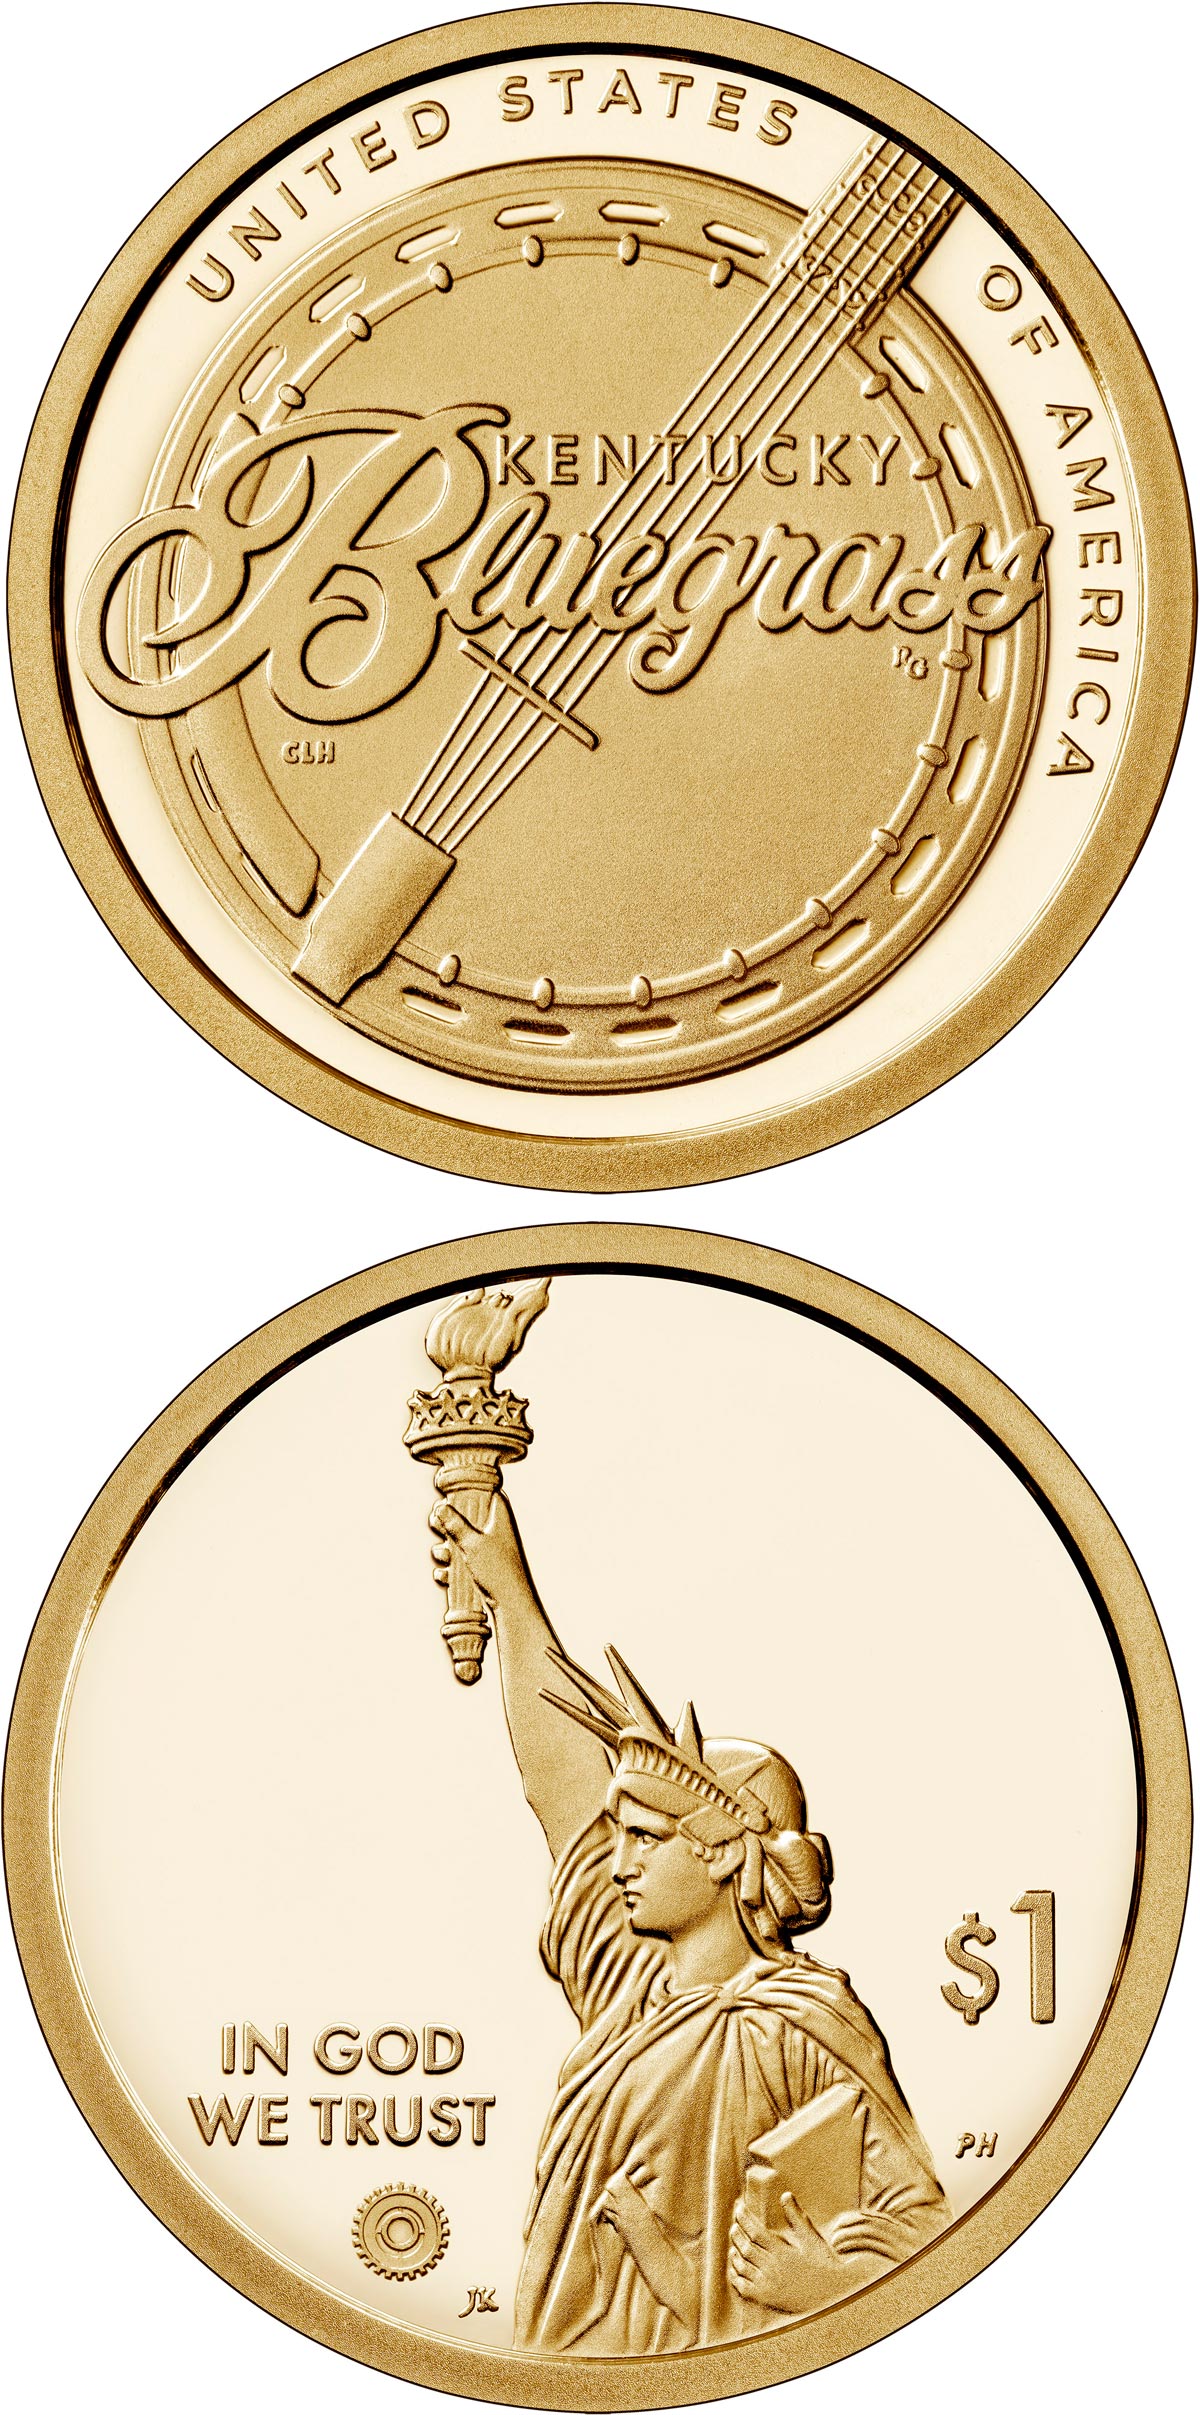 American Innovation® $1 Coin Designs Announced | U.S. Mint